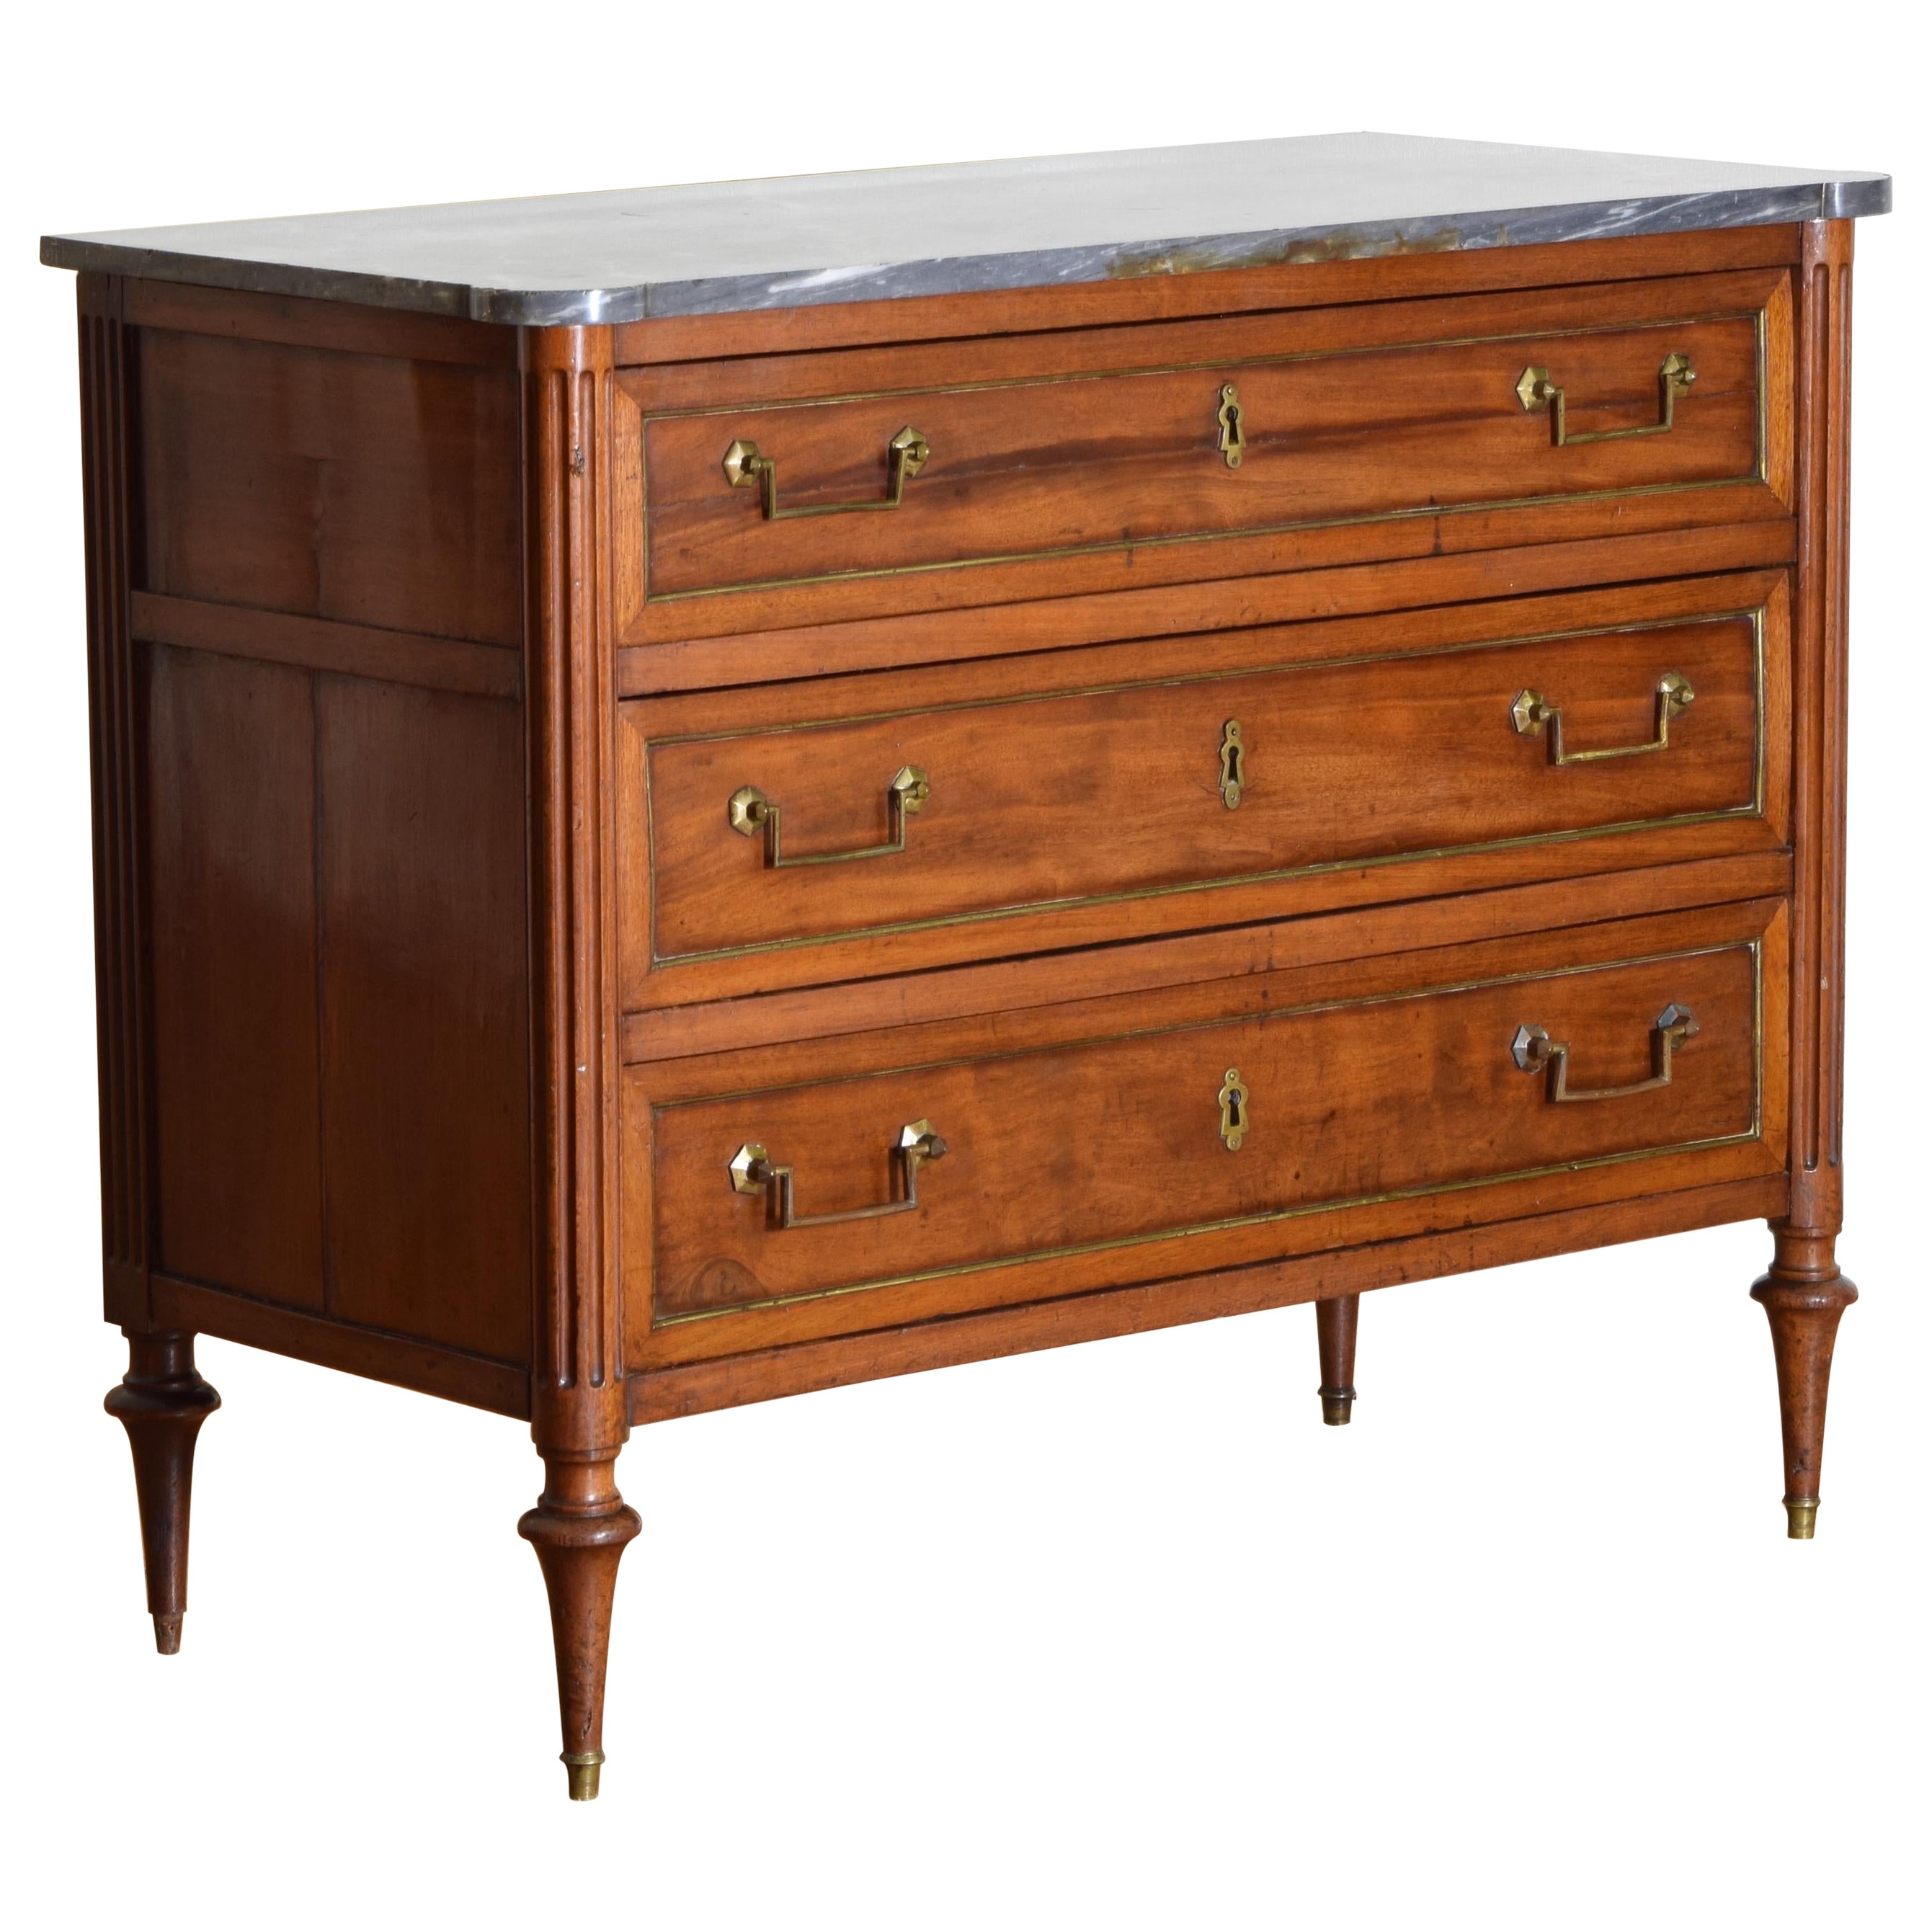 French Louis XVI Walnut & Brass Mounted Marble Top 3-Drawer Commode, circa 1780